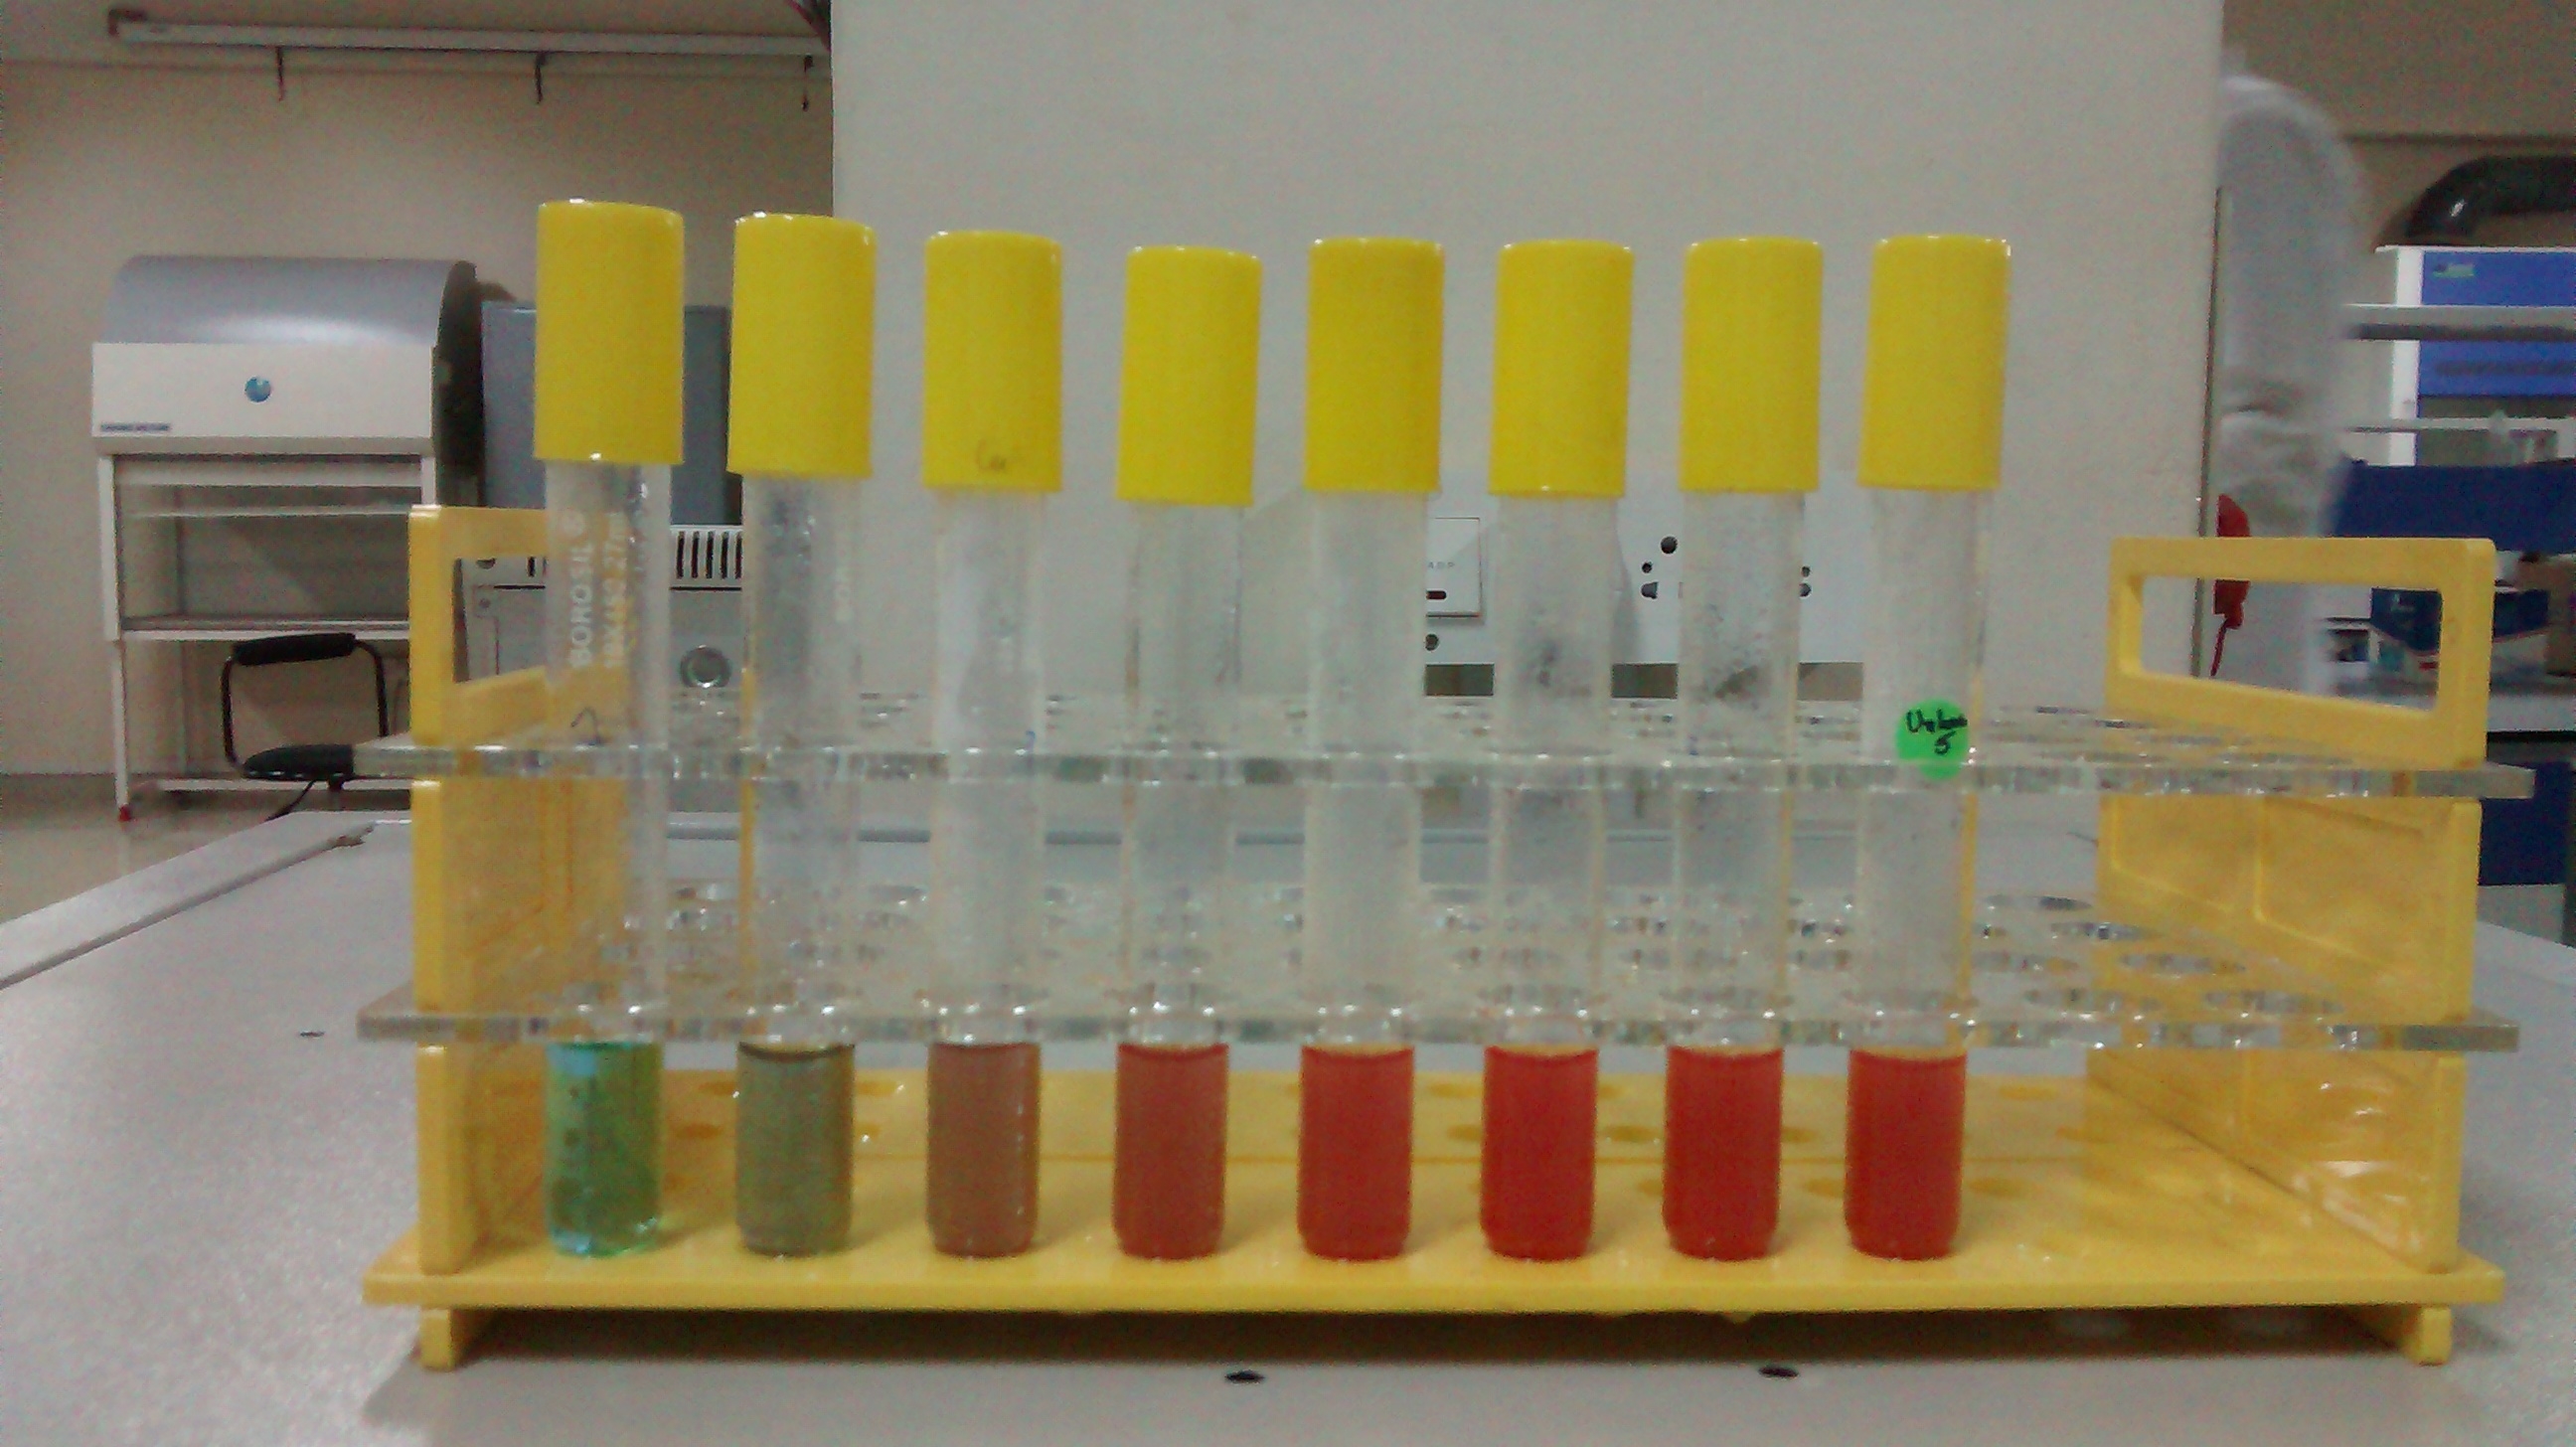 Photograph of eight test tubes in a test tube rack on a bench in a laboratory. The tubes all contain the same volume of liquid, which comes a couple of centimetres up the test tubes. The test tube on the far left contains blue liquid. As you move to the right through the test tubes, the colour gradually becomes more red. The tube on the far right contains dark red liquid.